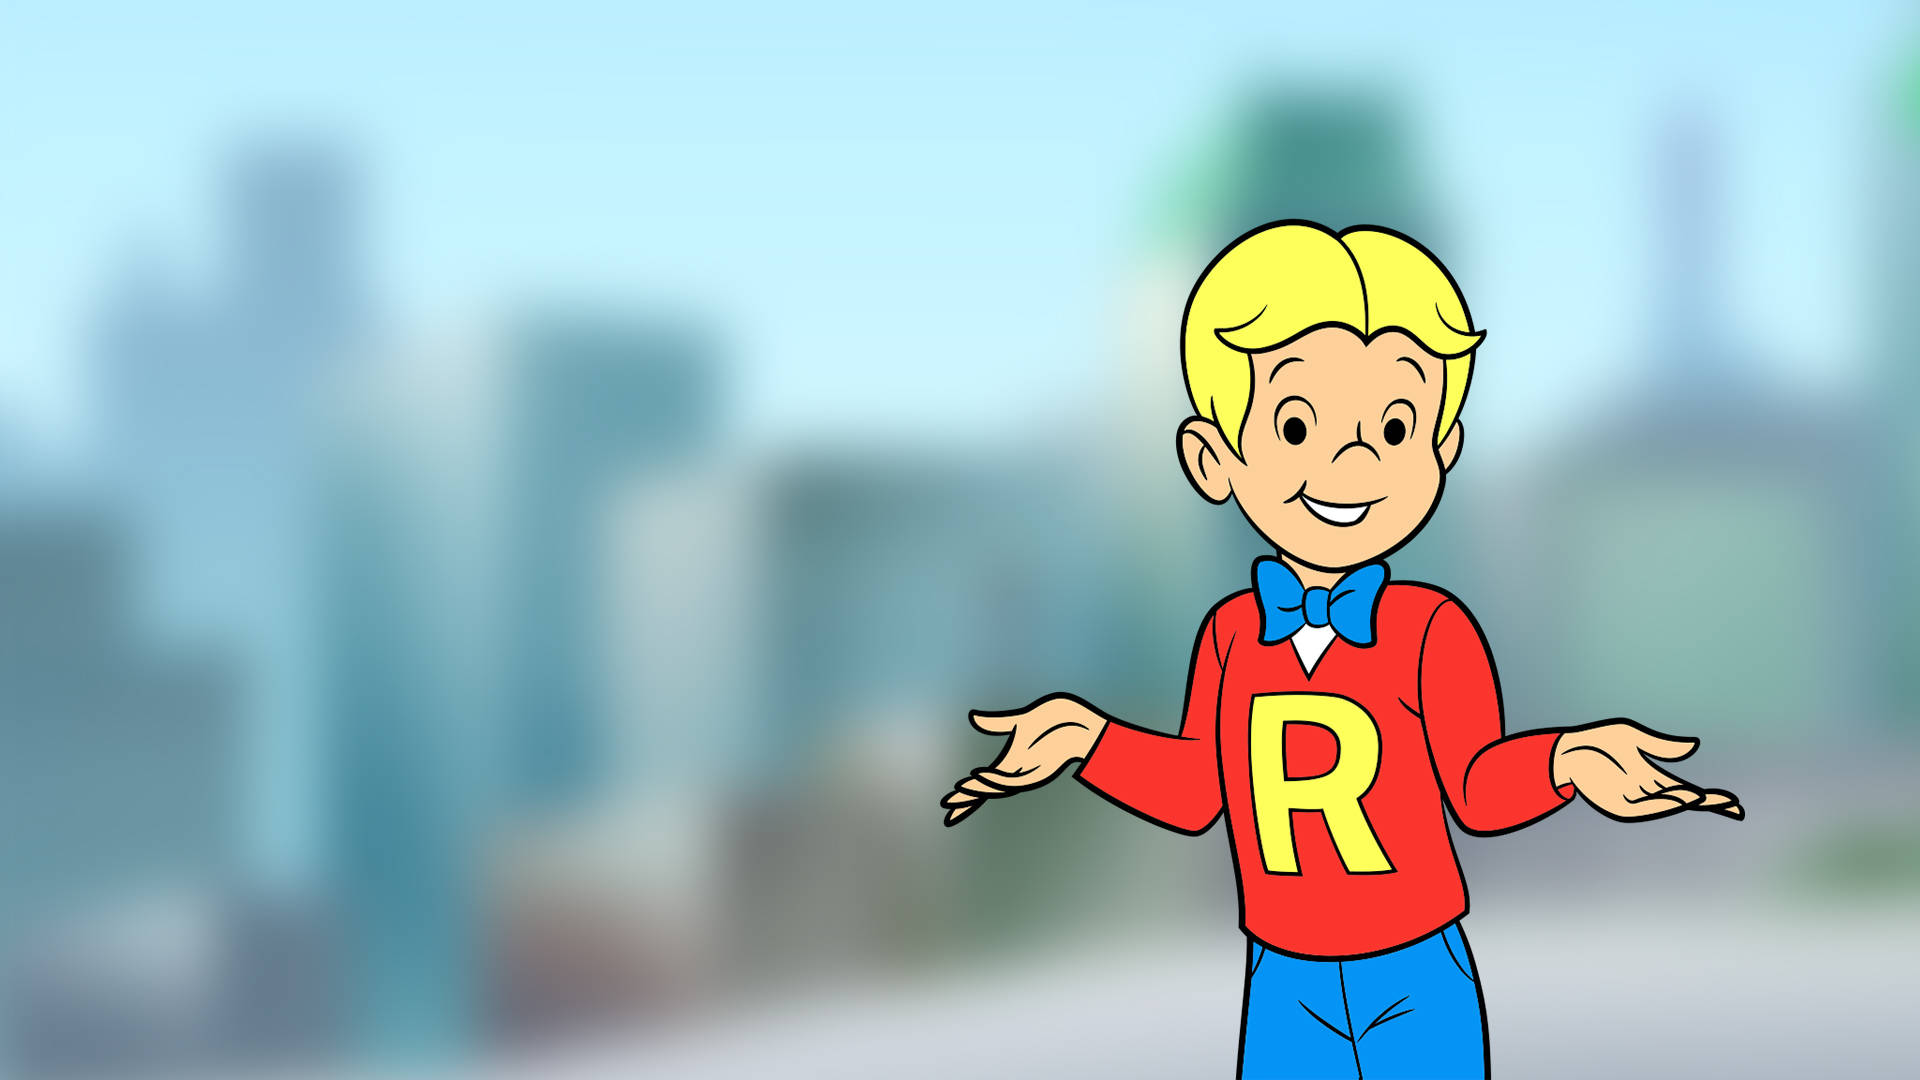 Free Richie Rich Wallpaper Downloads, [100+] Richie Rich Wallpapers for  FREE 